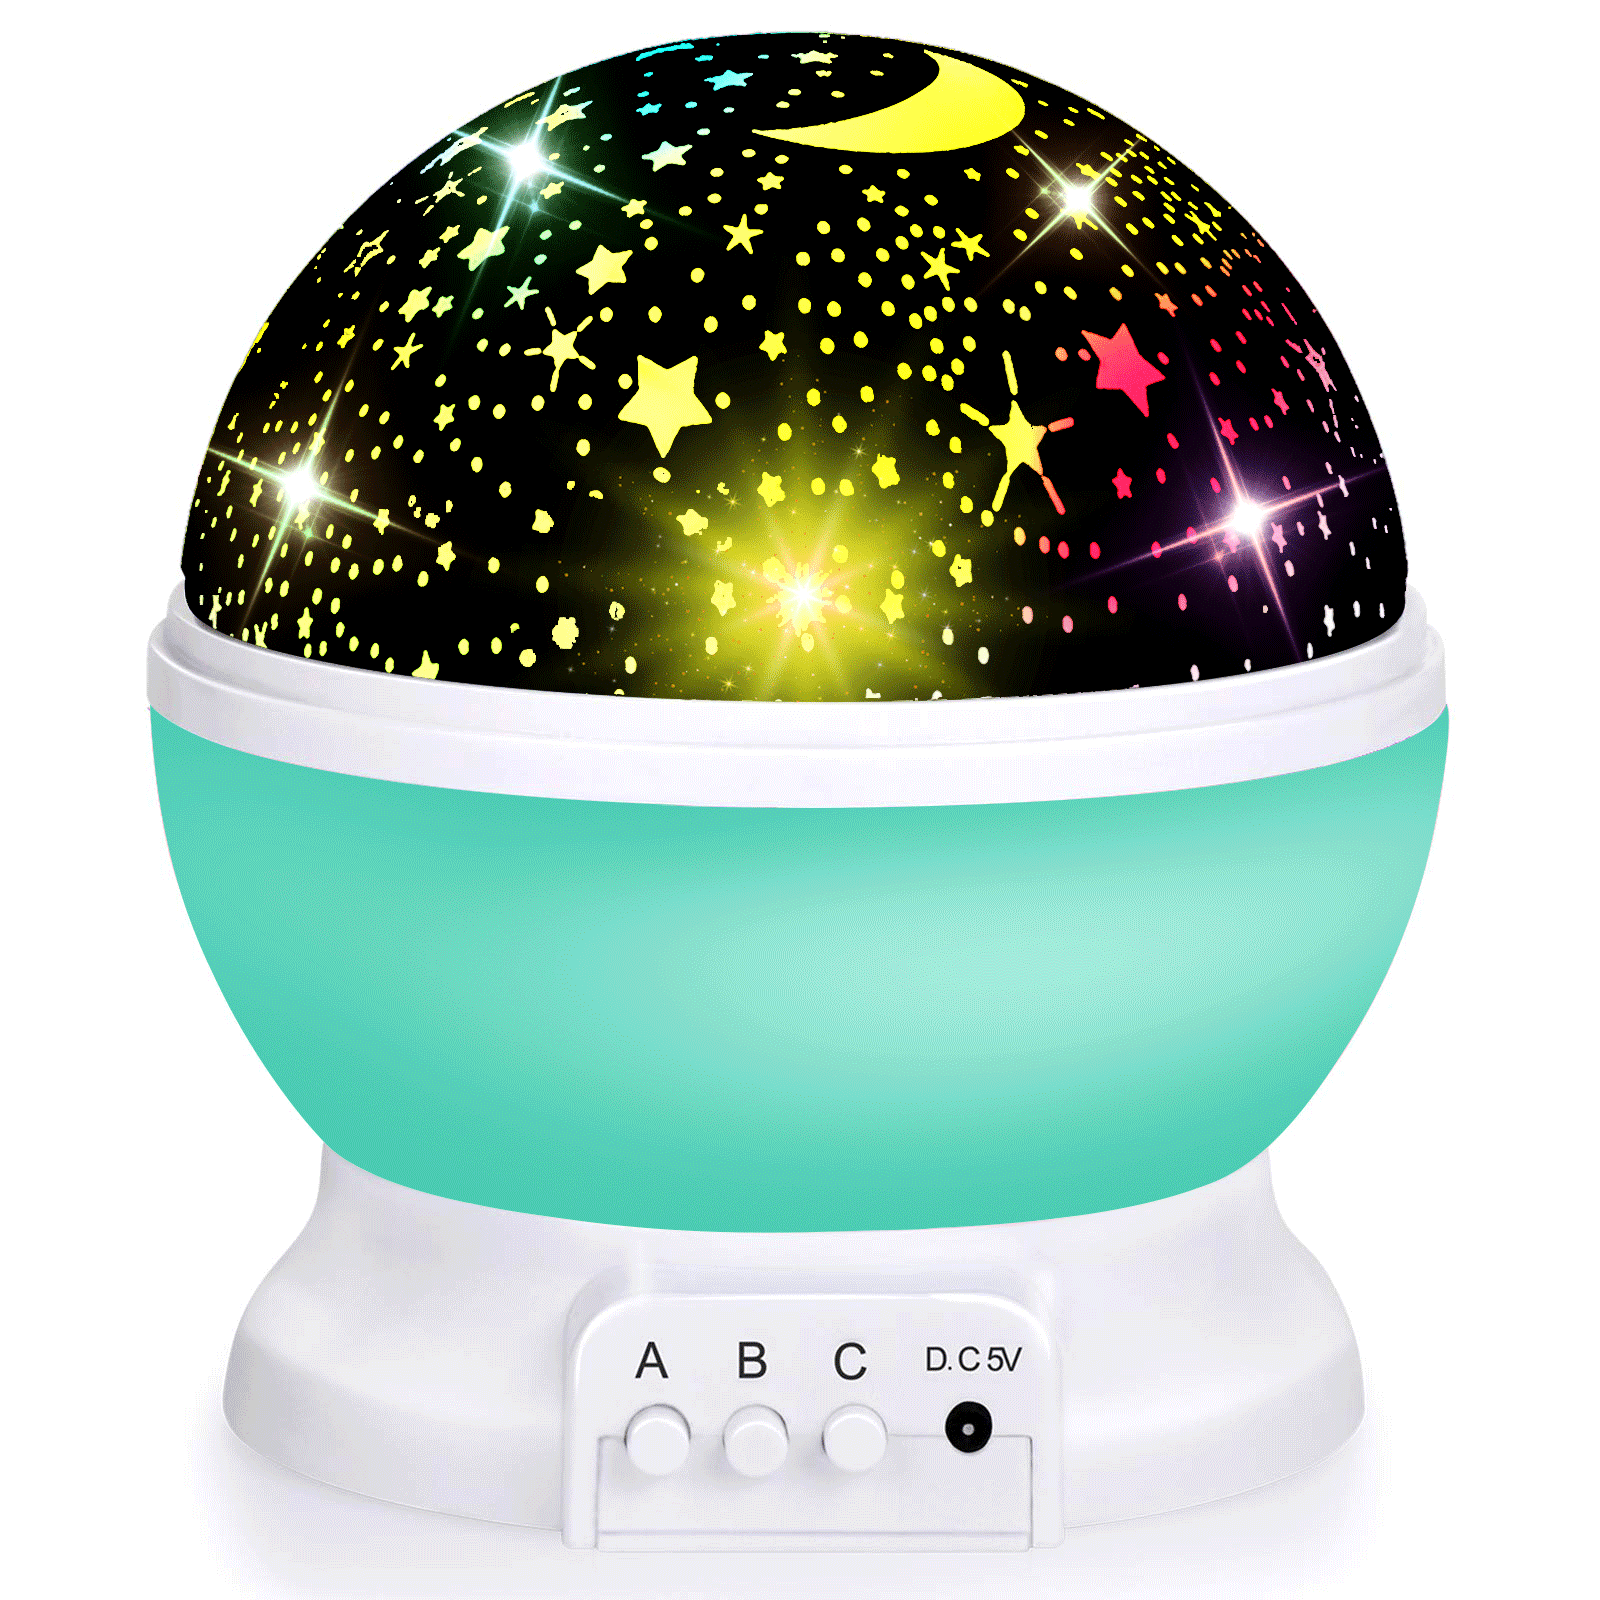 Star Projector Starry LED Night Light, 360 Degree Rotating Moon Sky Night  Lamp for Adult Kids Sleep, Best Toys Christmas Gifts - Walmart.com